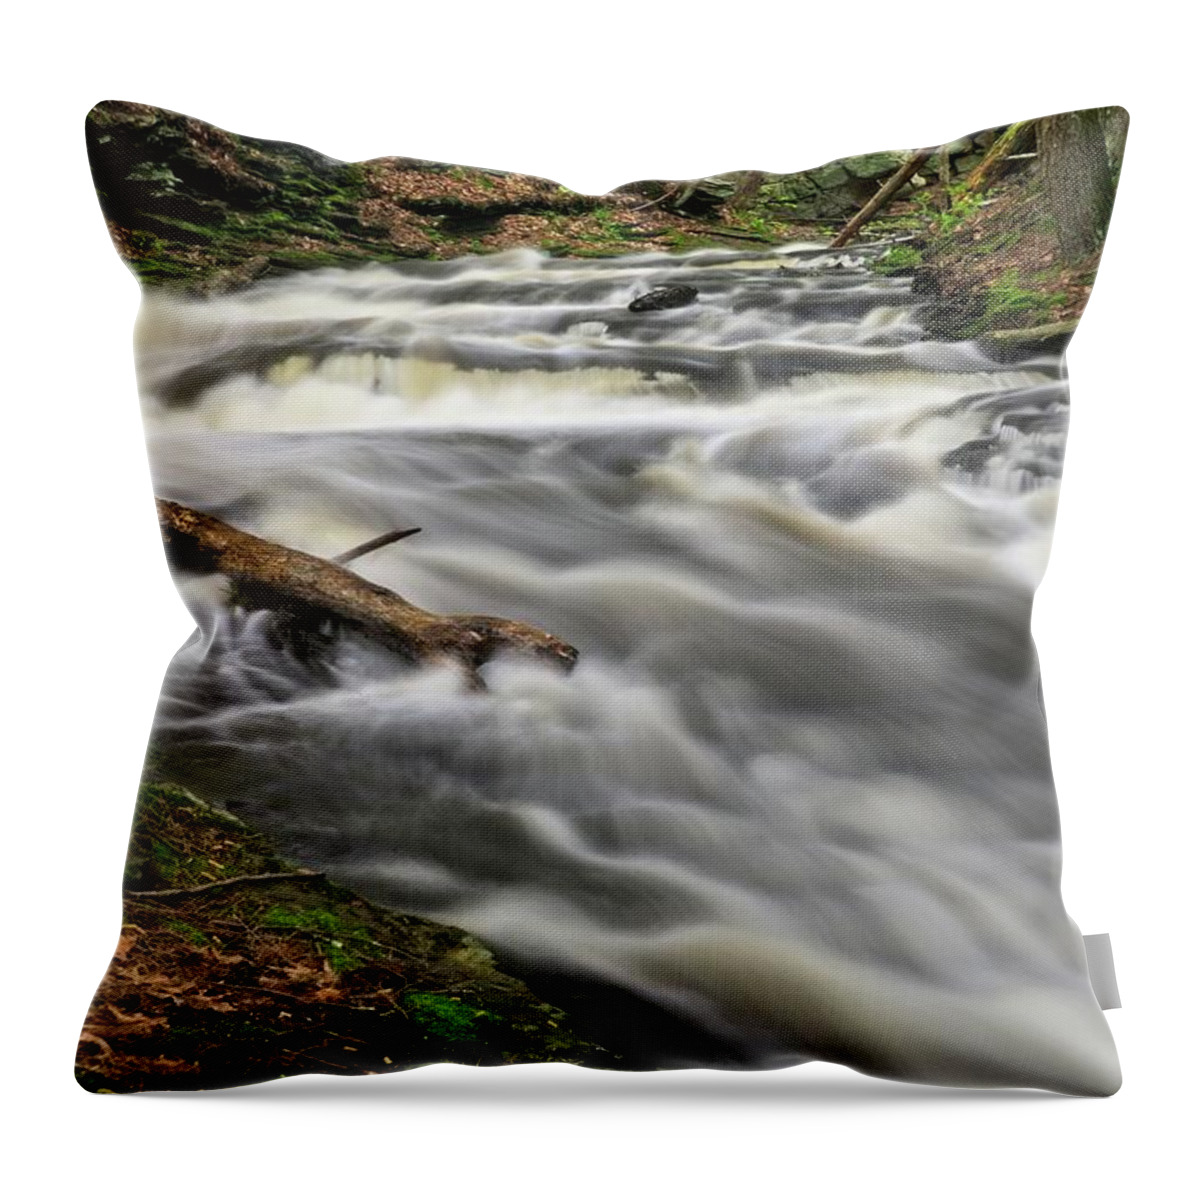 Waterfall Throw Pillow featuring the photograph Down The Throat by Allan Van Gasbeck